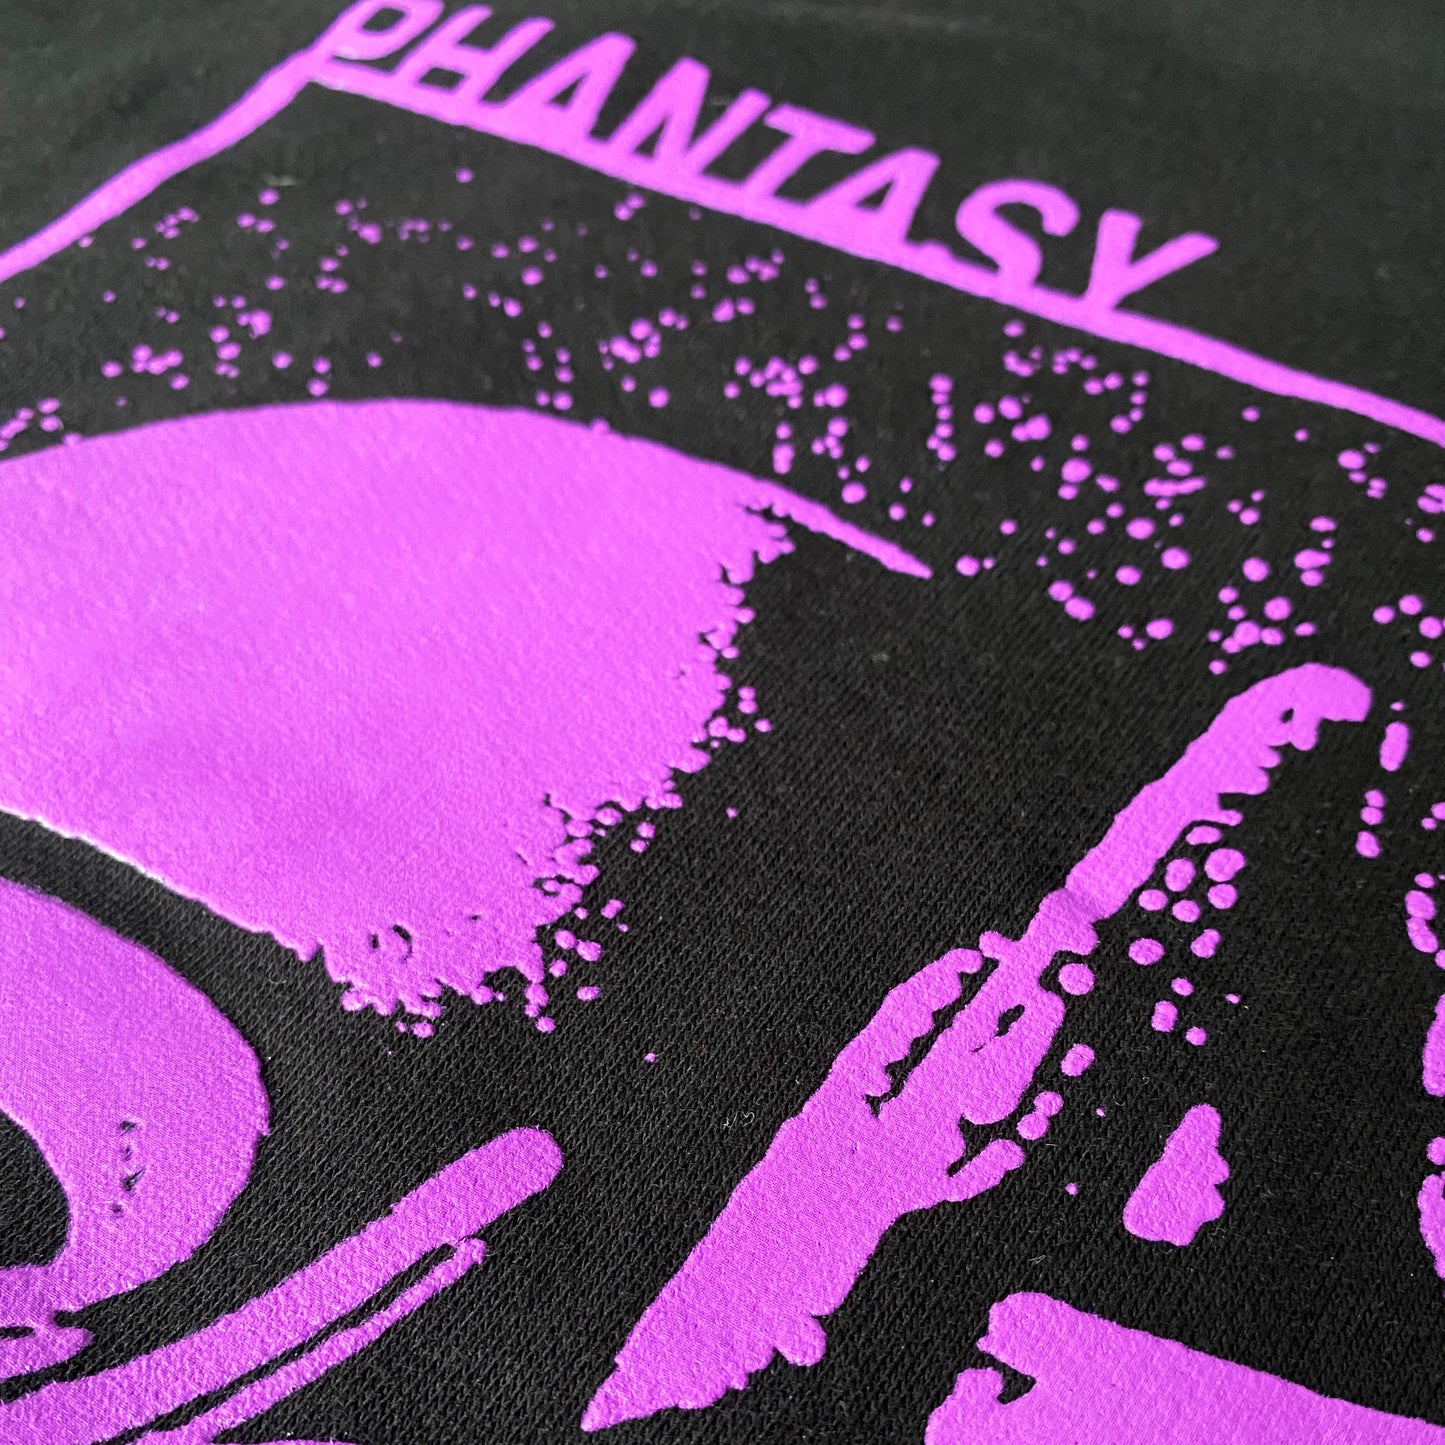 
                  
                    Phantasy 'In This World But Not Of It' Hoodie
                  
                